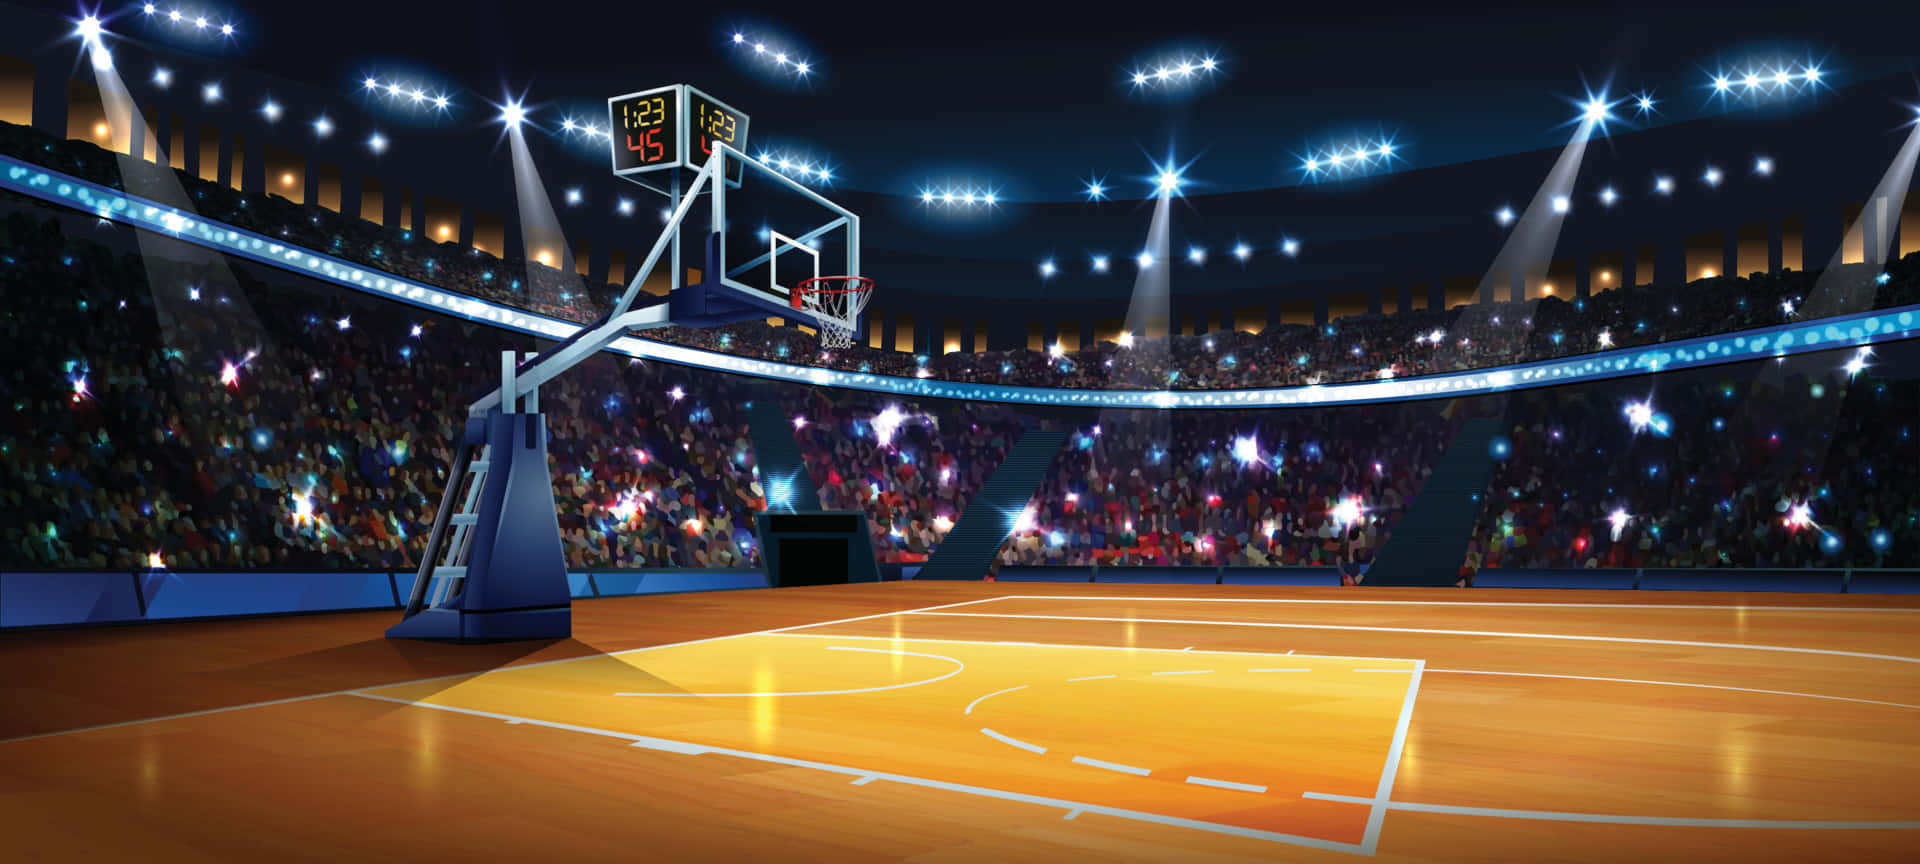 A Basketball Court With Lights